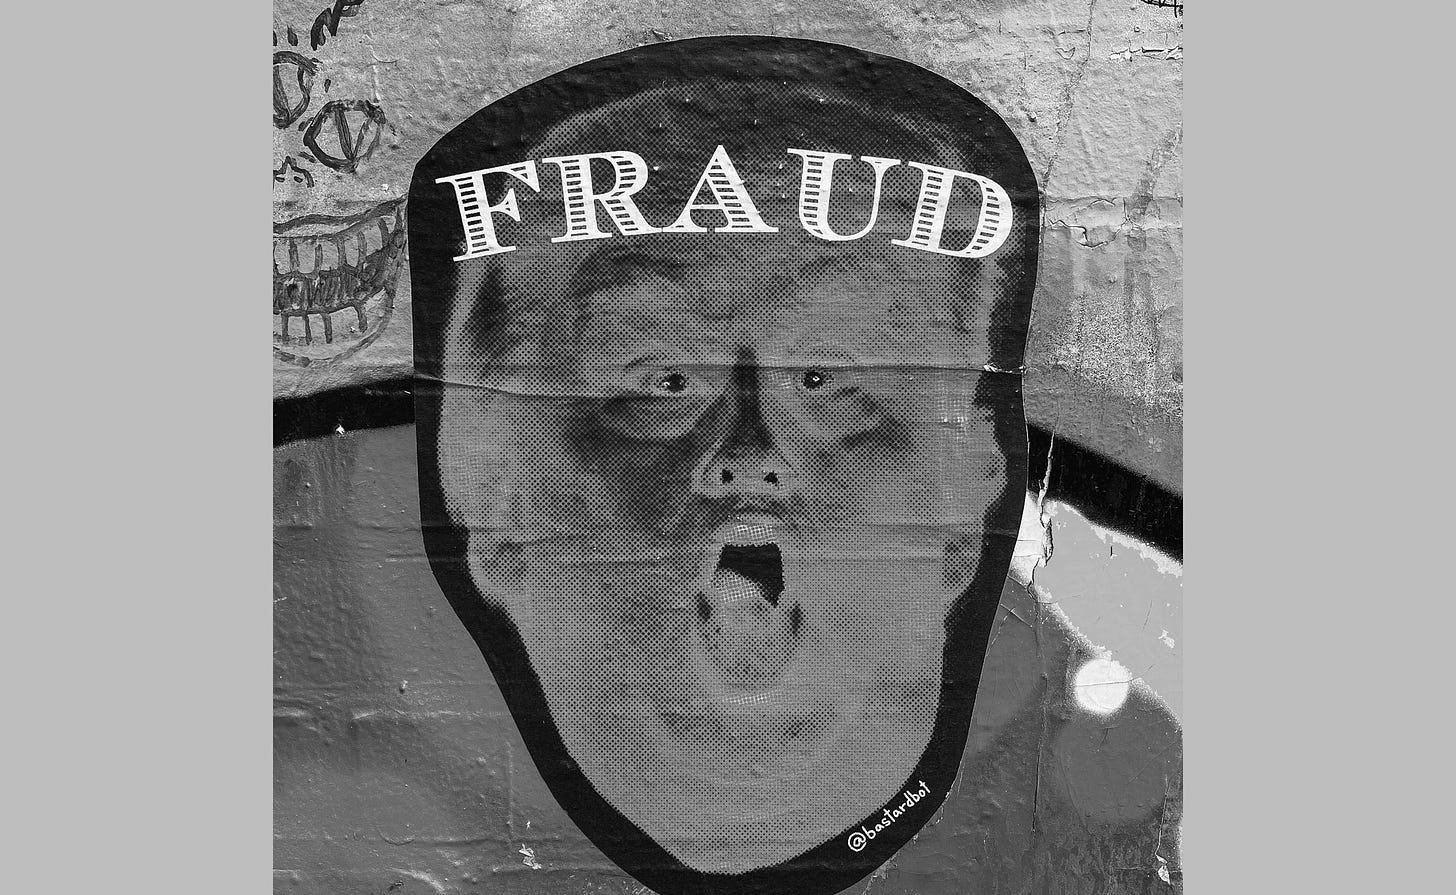 Image of Trump's face with his mouth wide open and the word "FRAUD" written above it